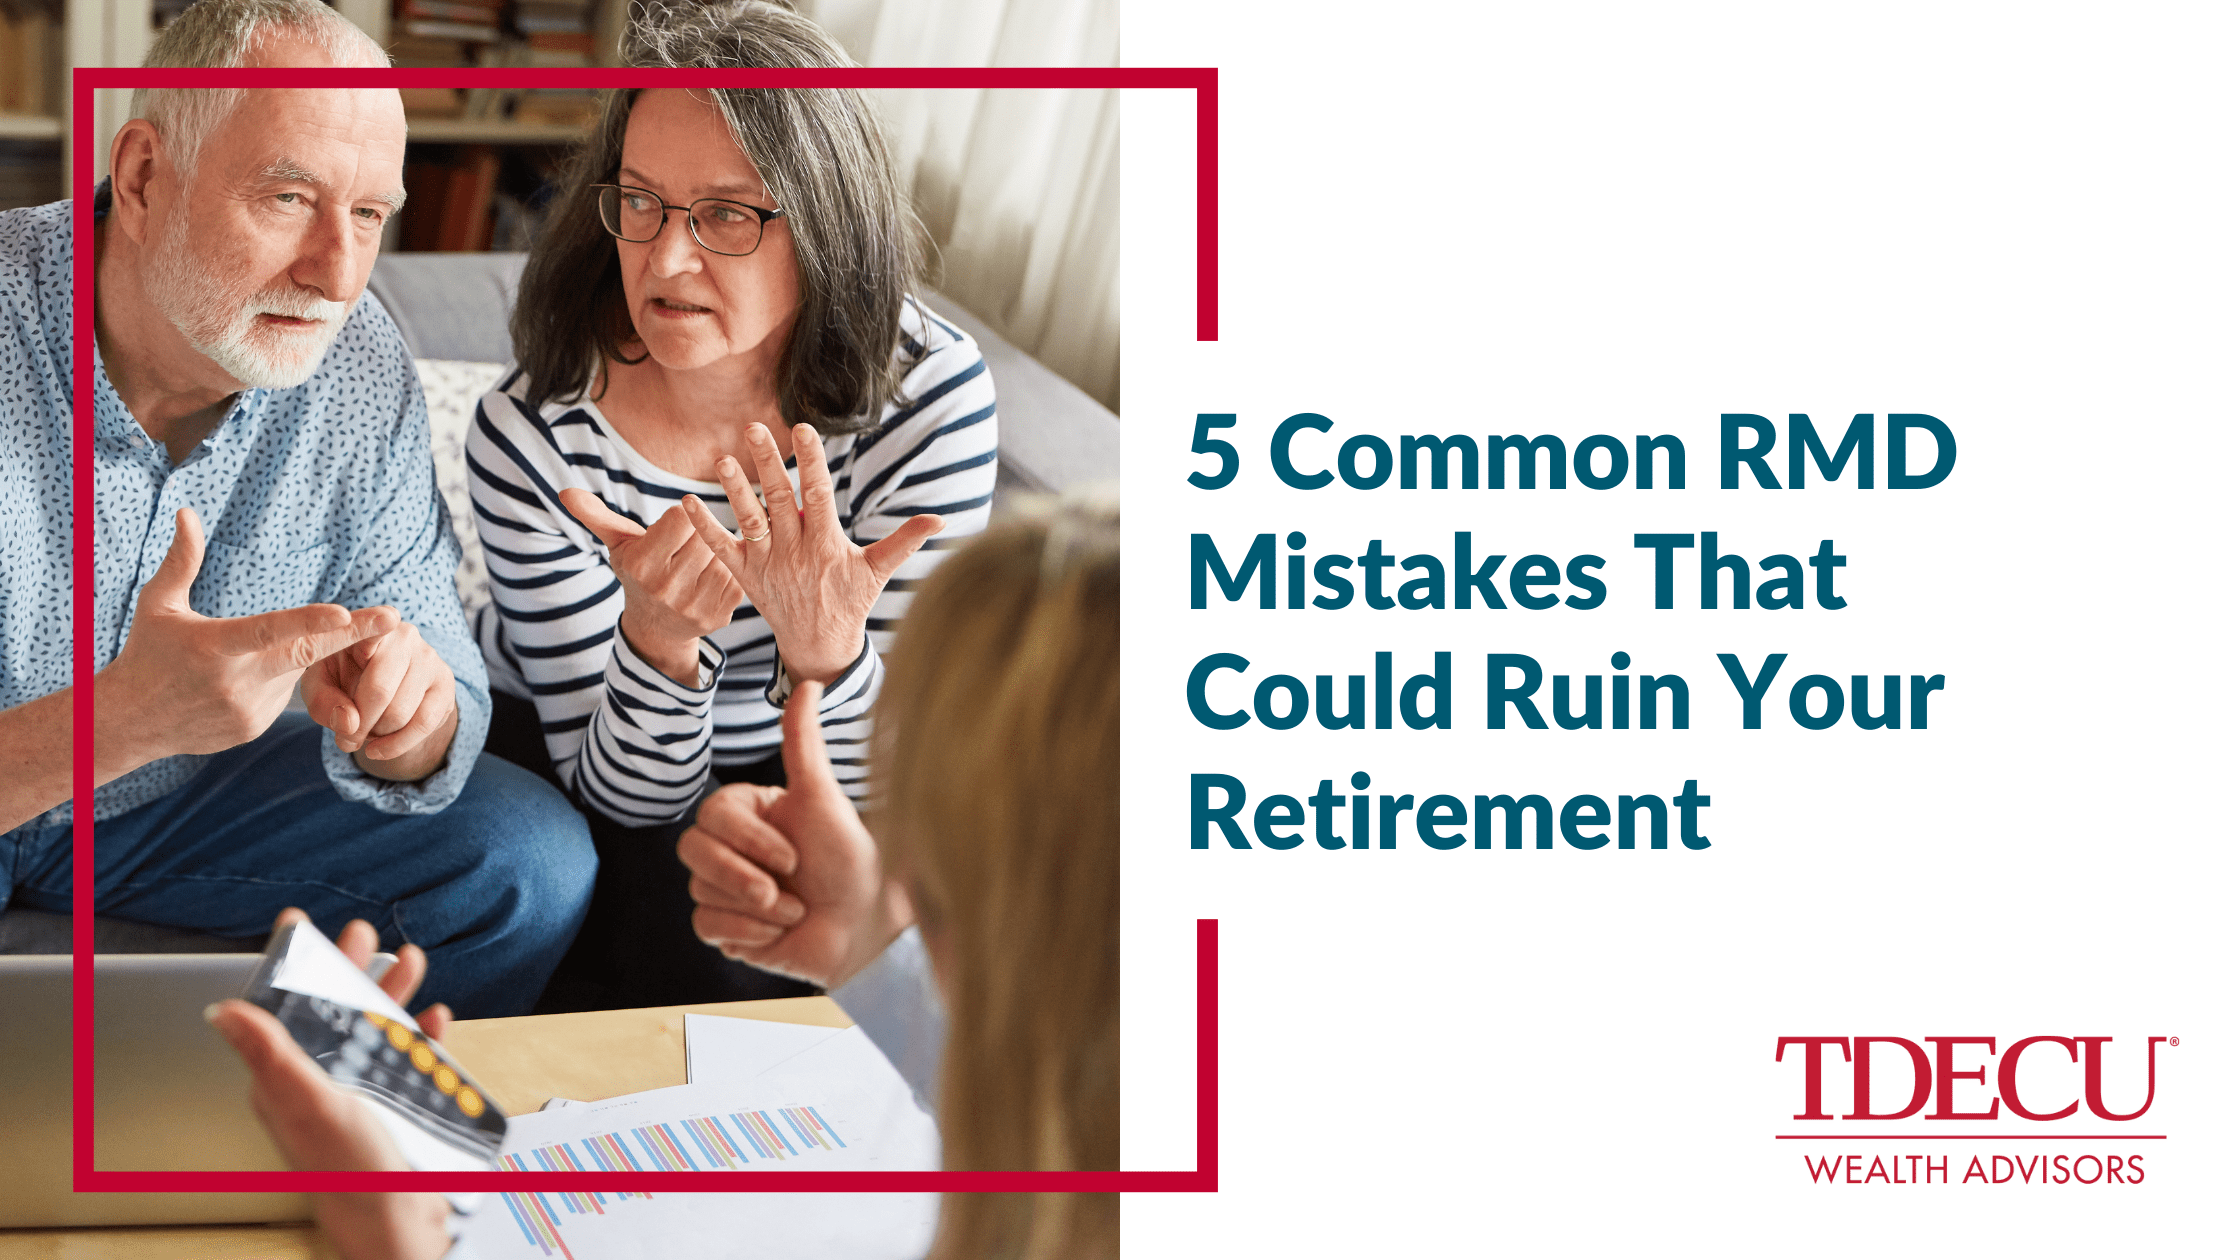 5 Common RMD Mistakes That Could Ruin Your Retirement